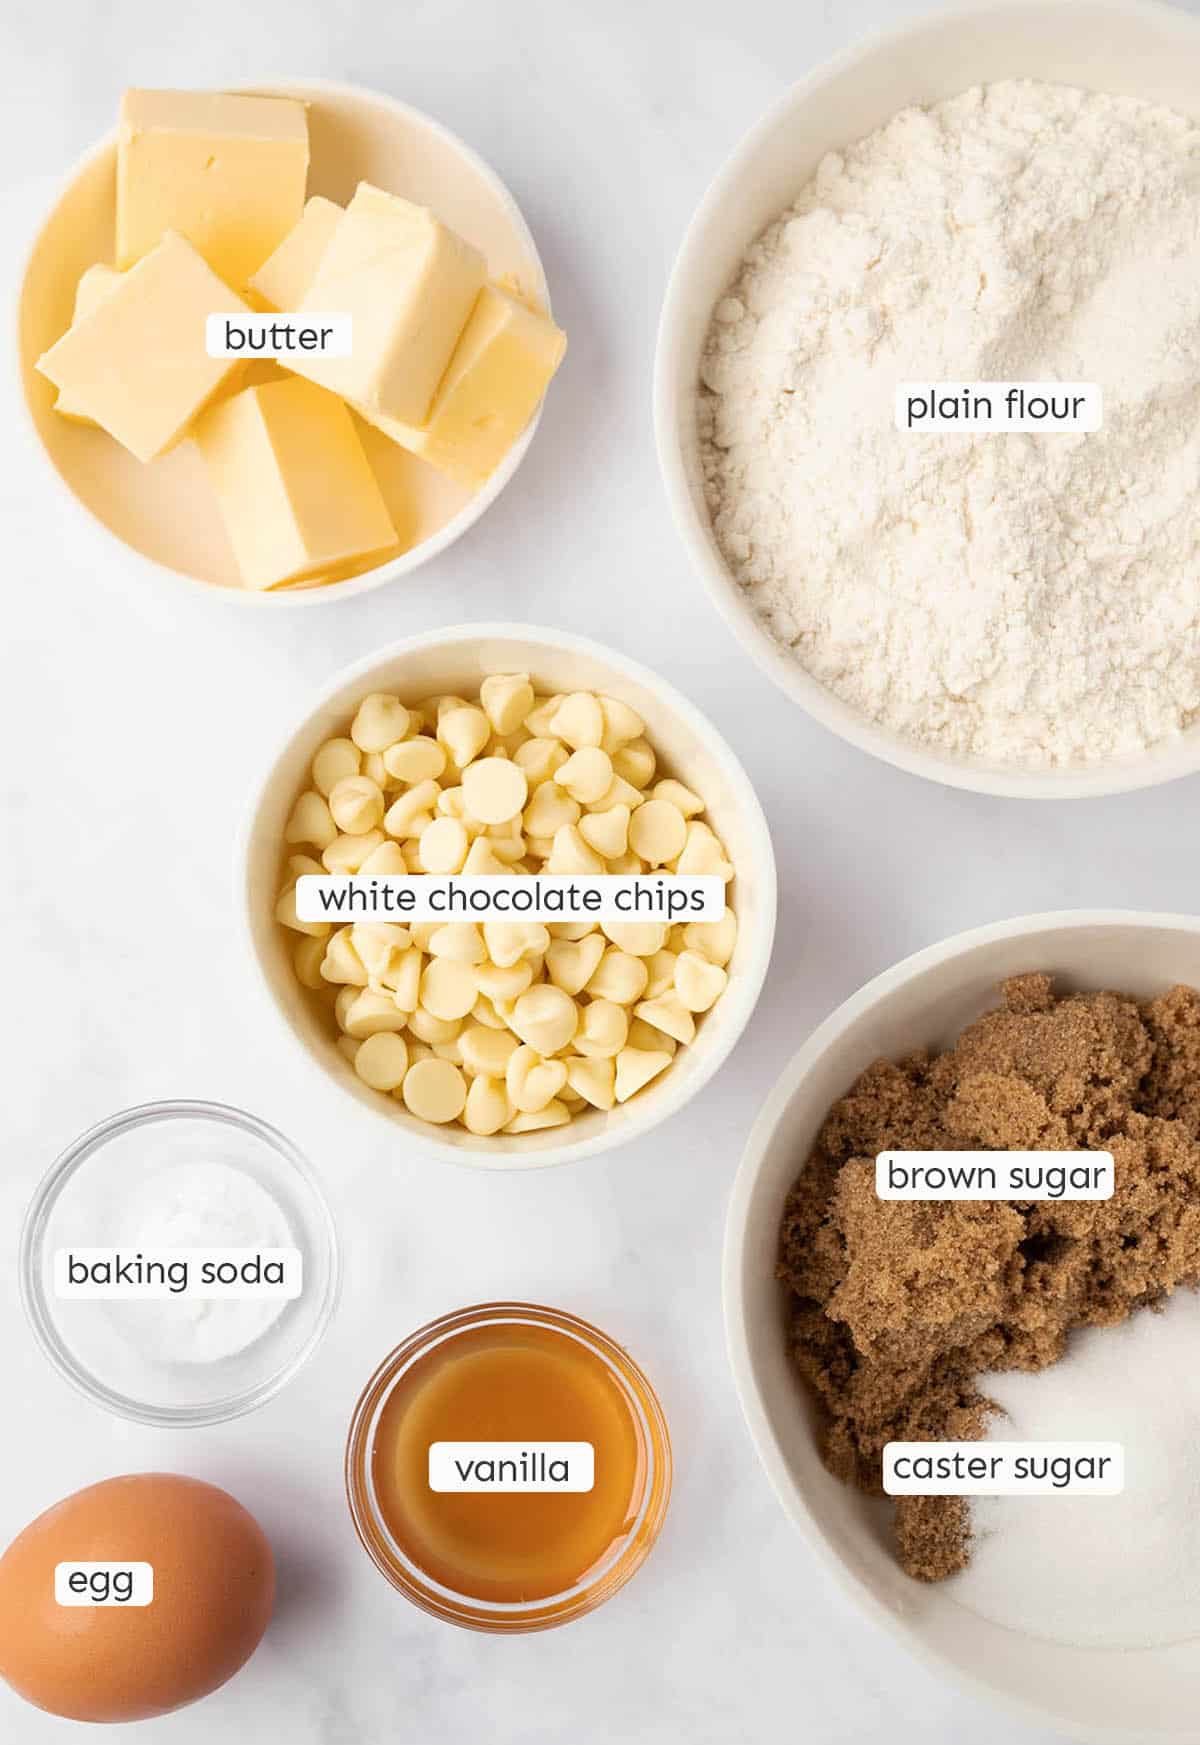 All the ingredients needed to make white chocolate chip cookies from scratch on a marble backdrop.